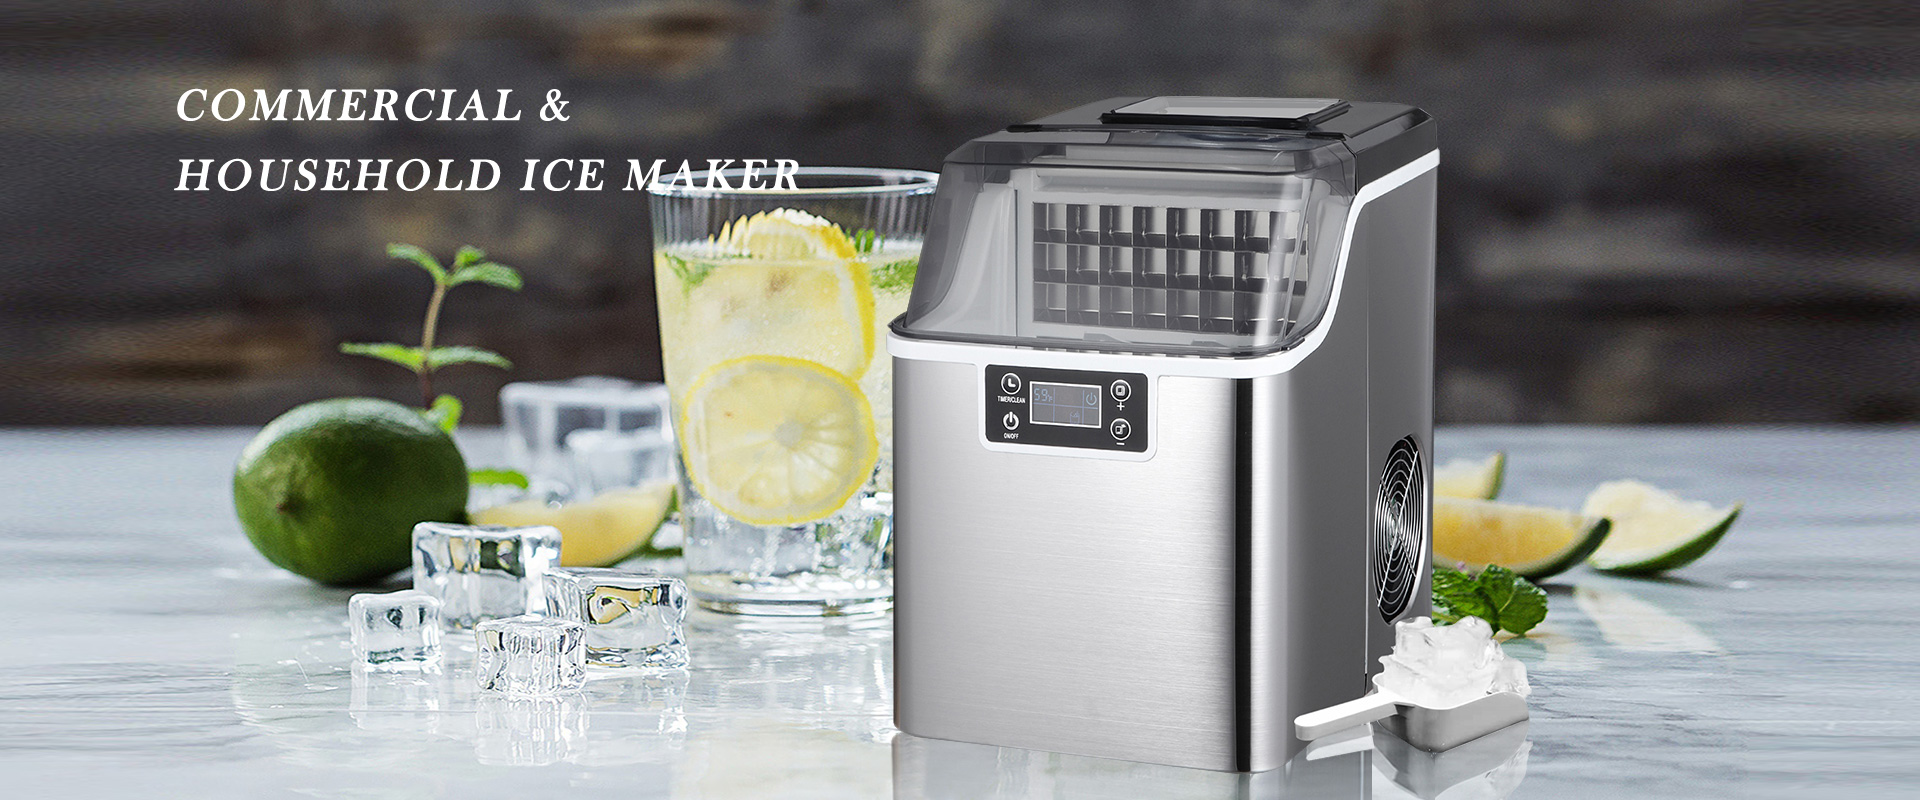 Cheap Household Ice Maker China